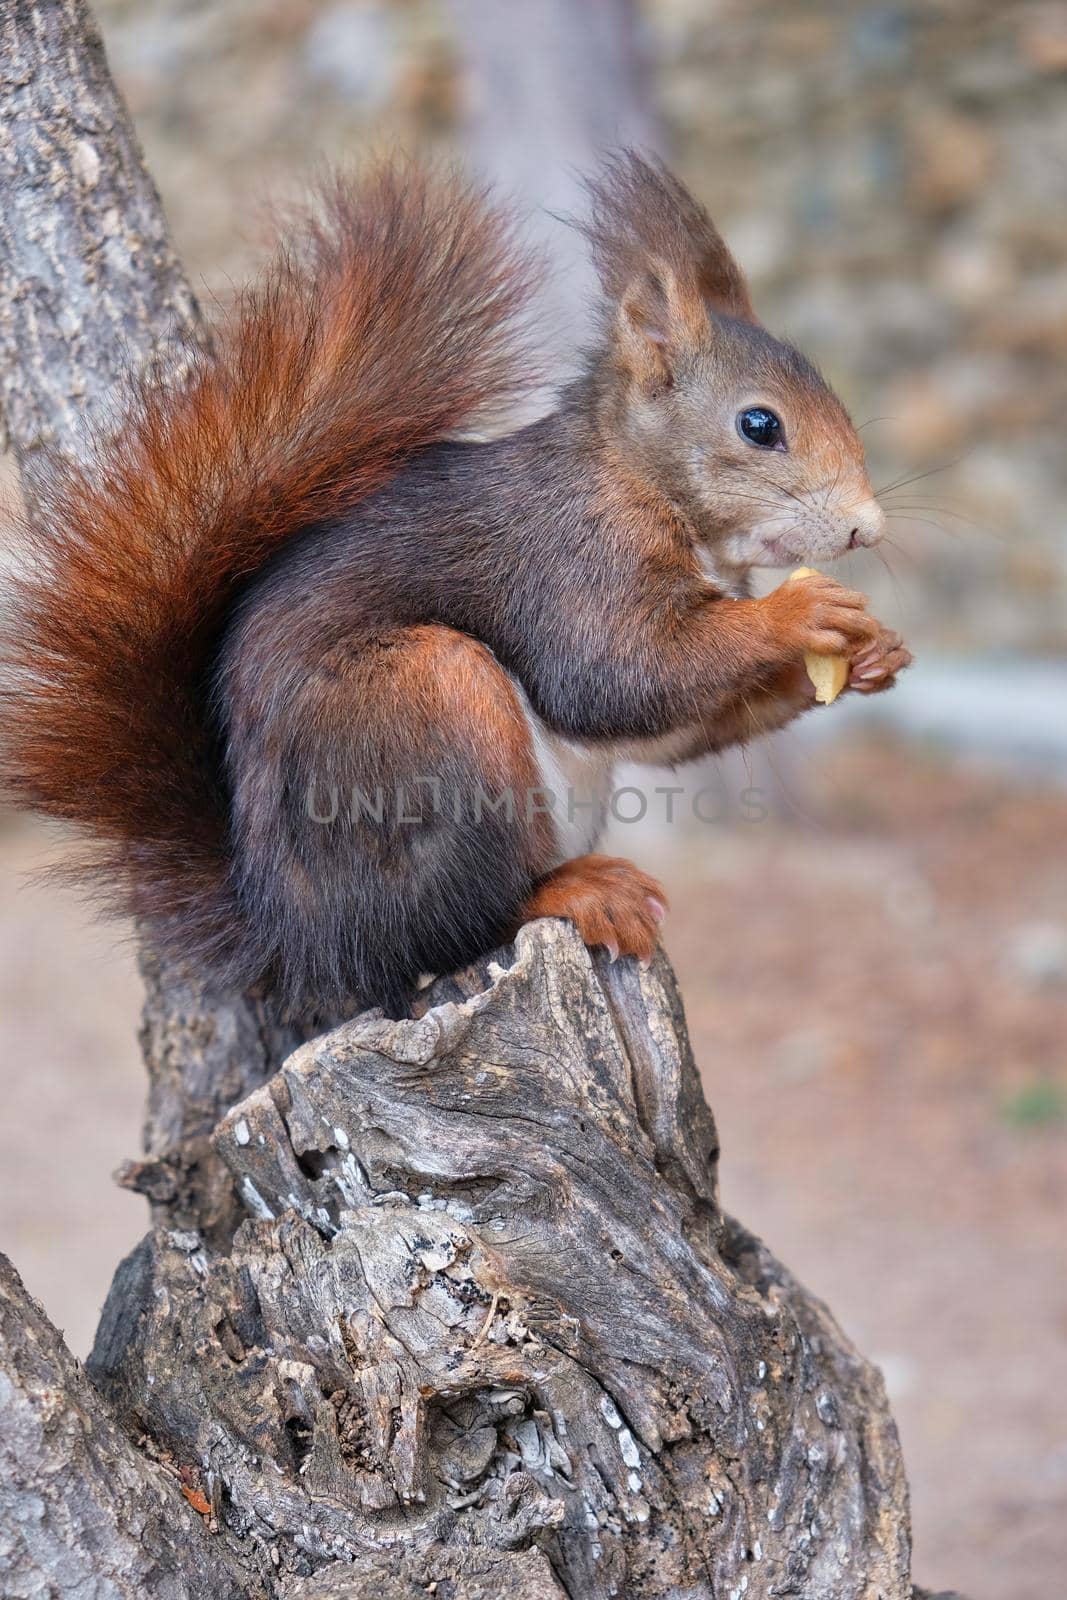 Squirrel in an Spanish park by JCVSTOCK